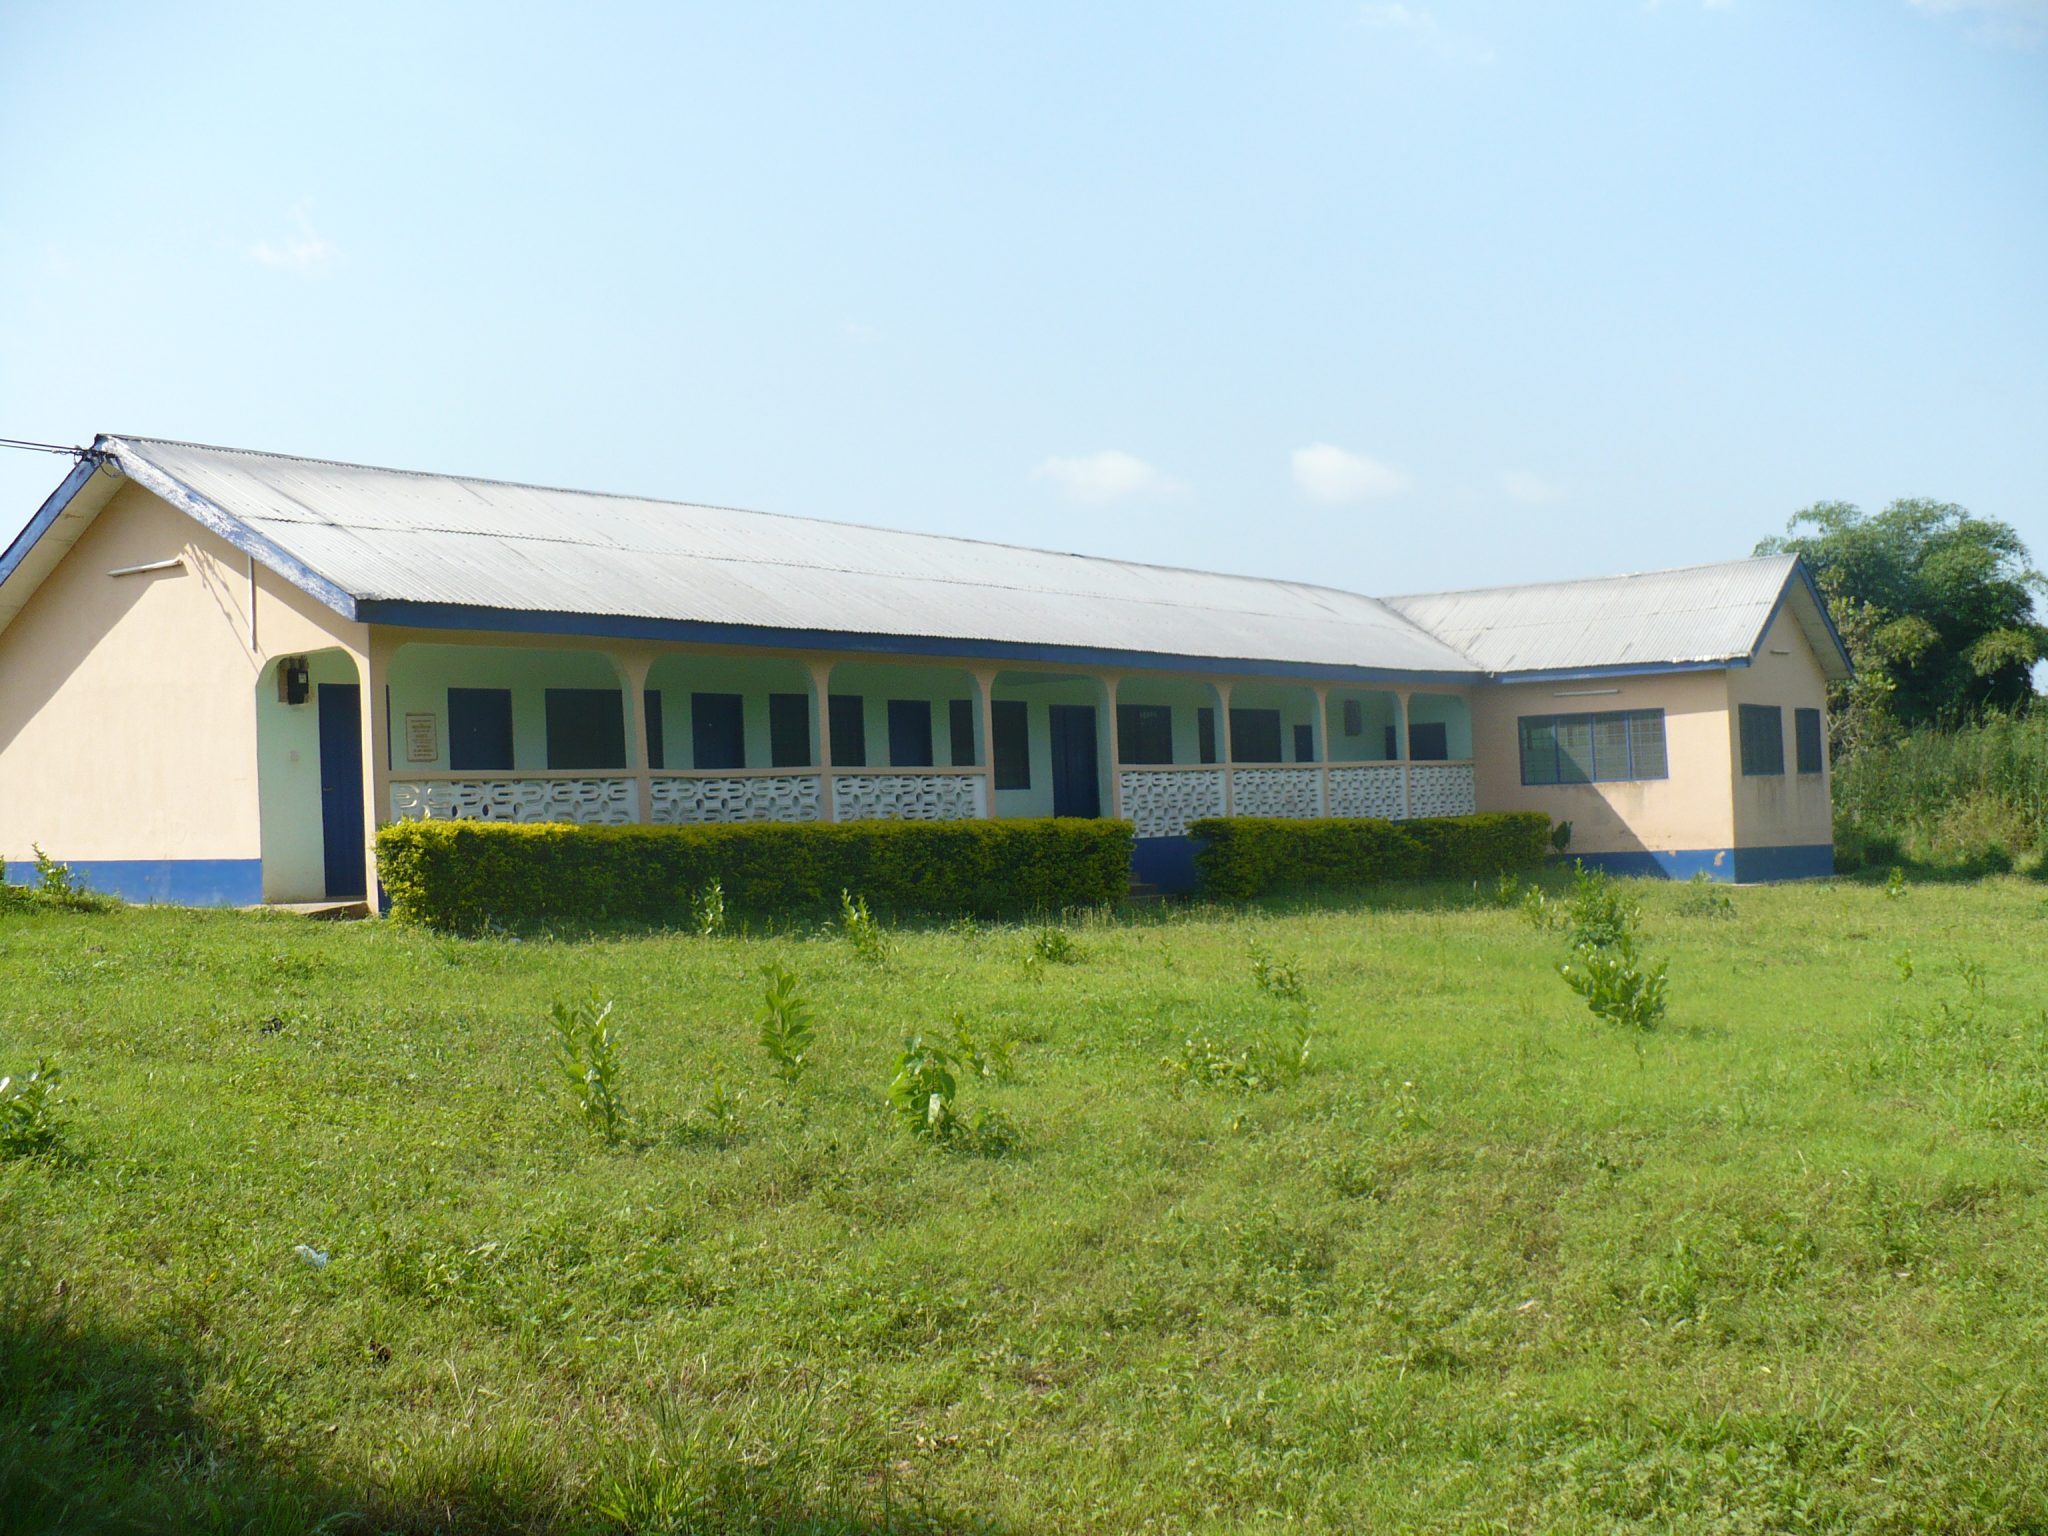 The Nkonya Language Project Offices